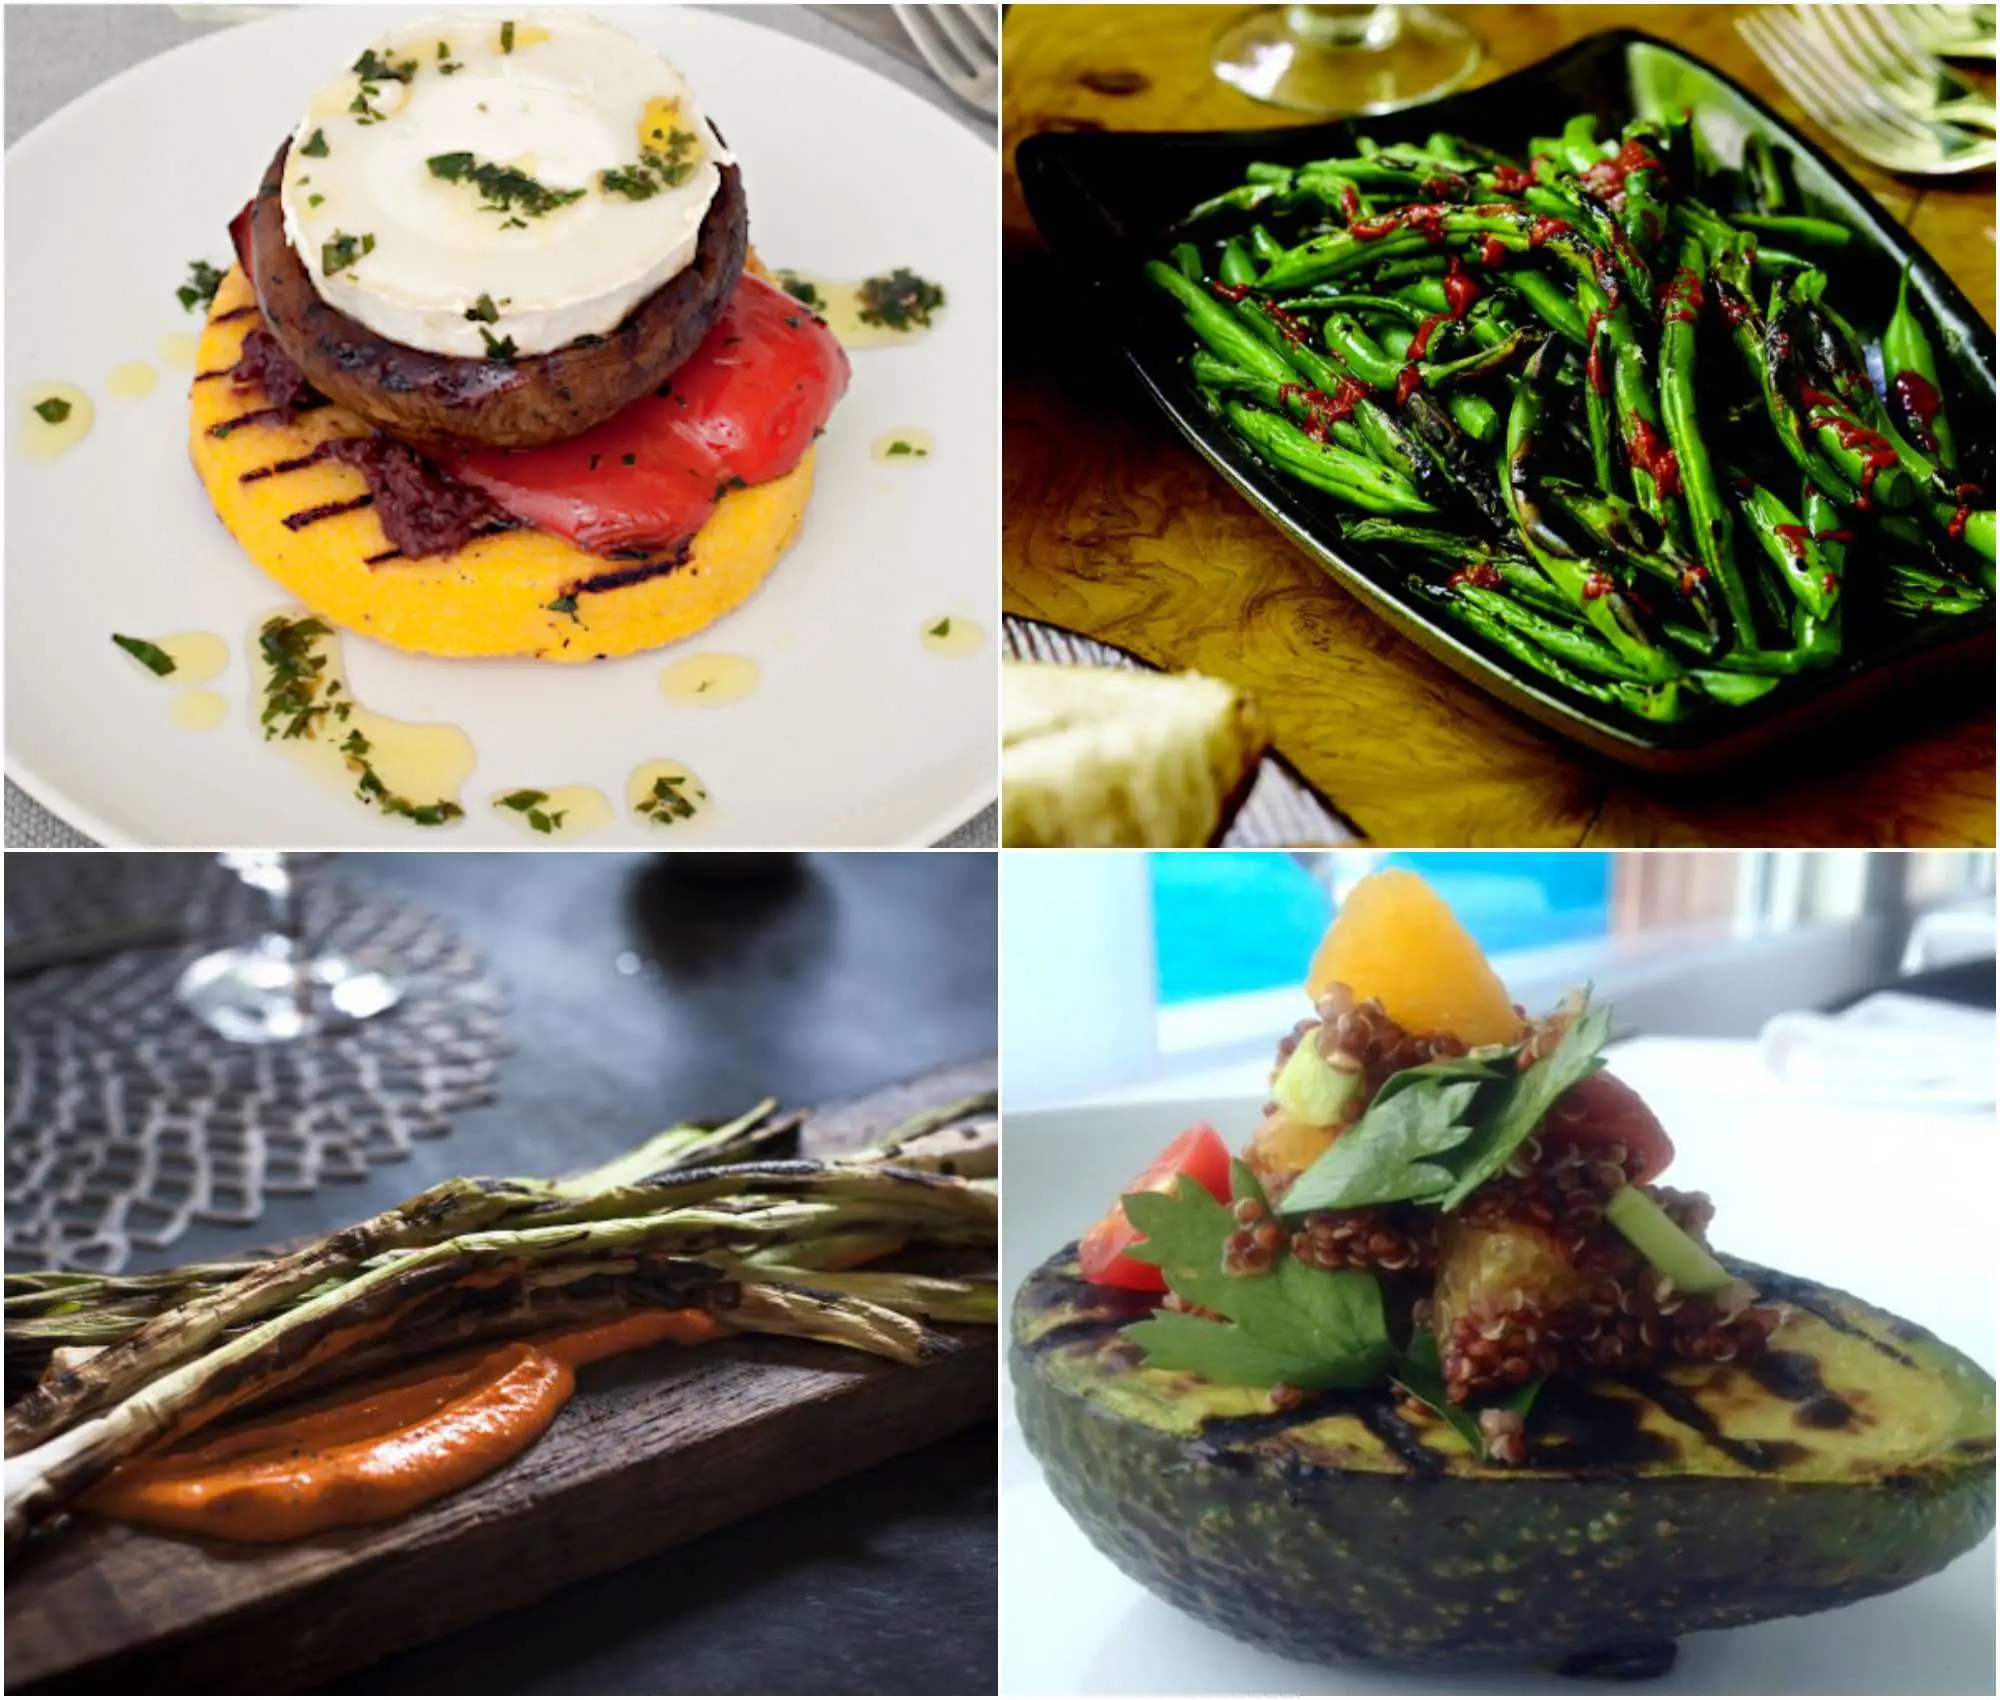 9 Ideas For Dinner Tonight: Grilled Vegetables